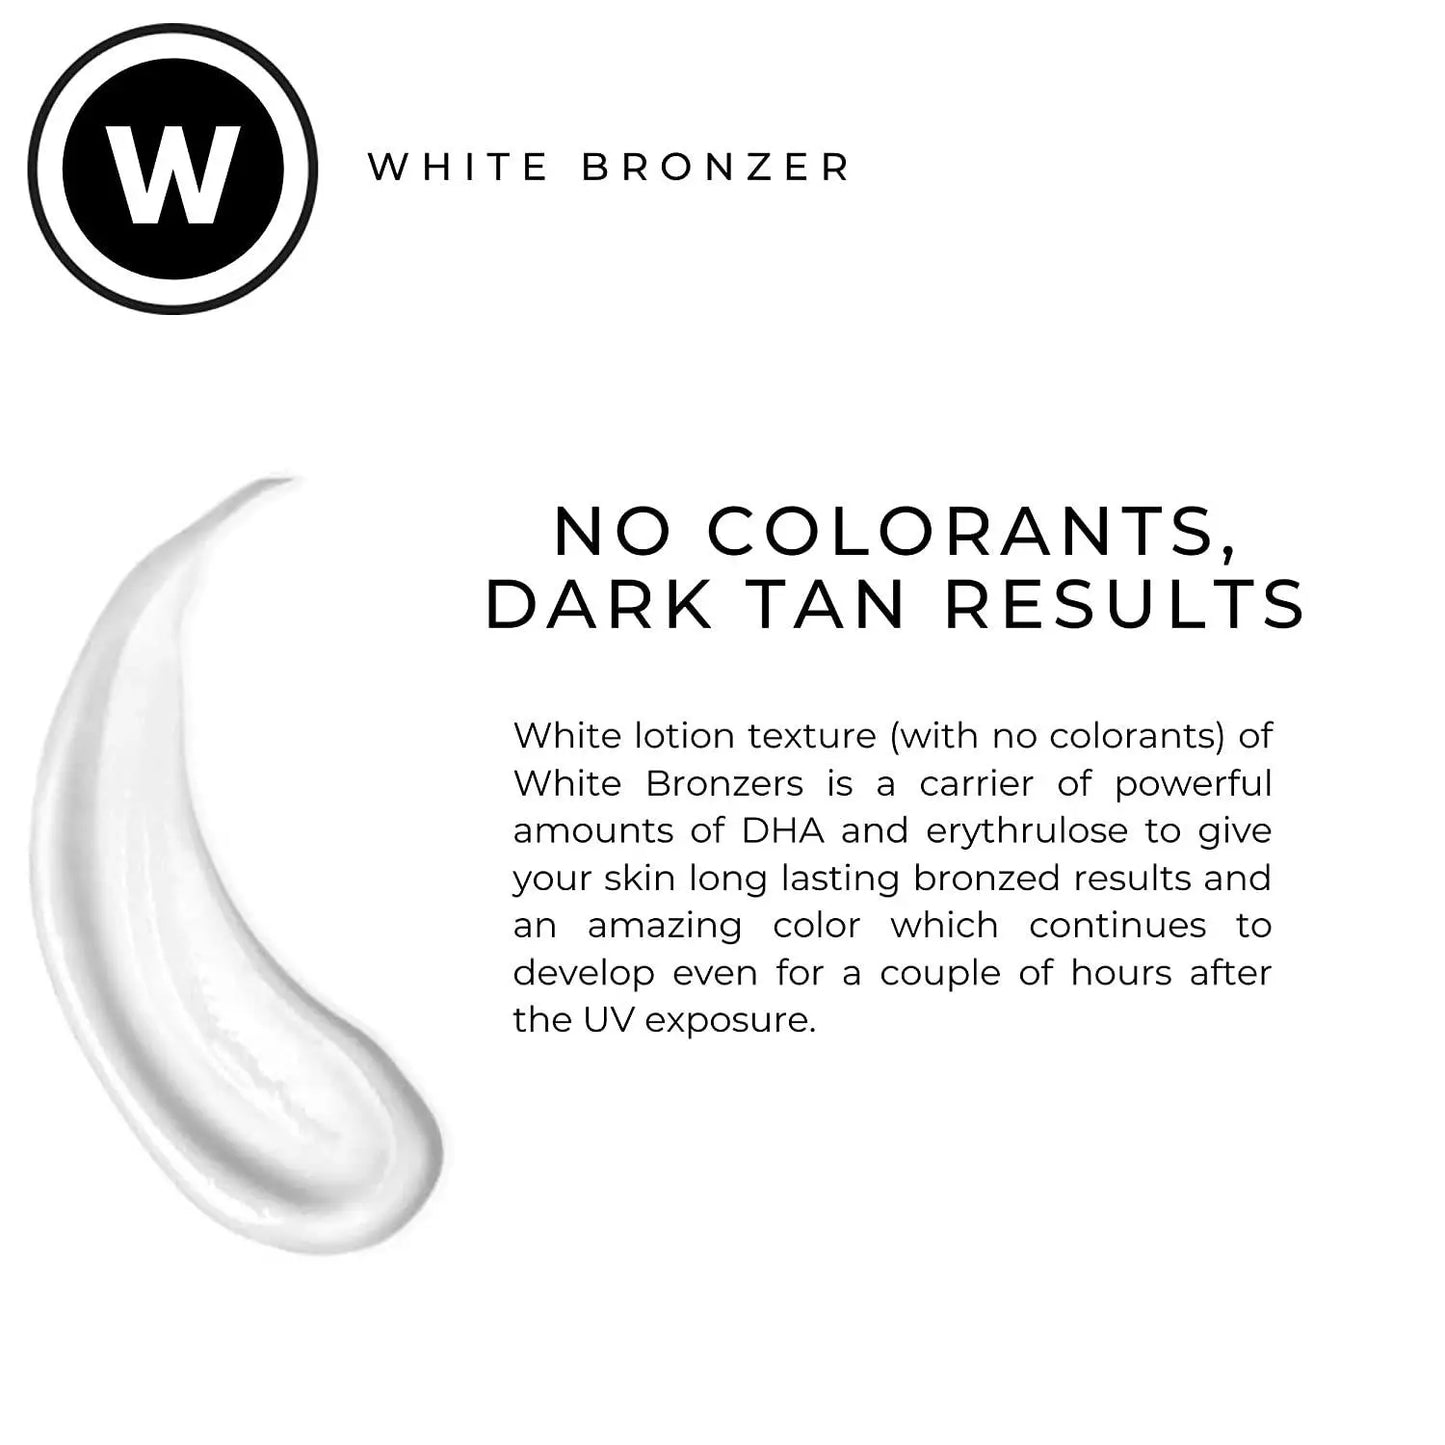 White bronzer sunbed cream with no colorants - information